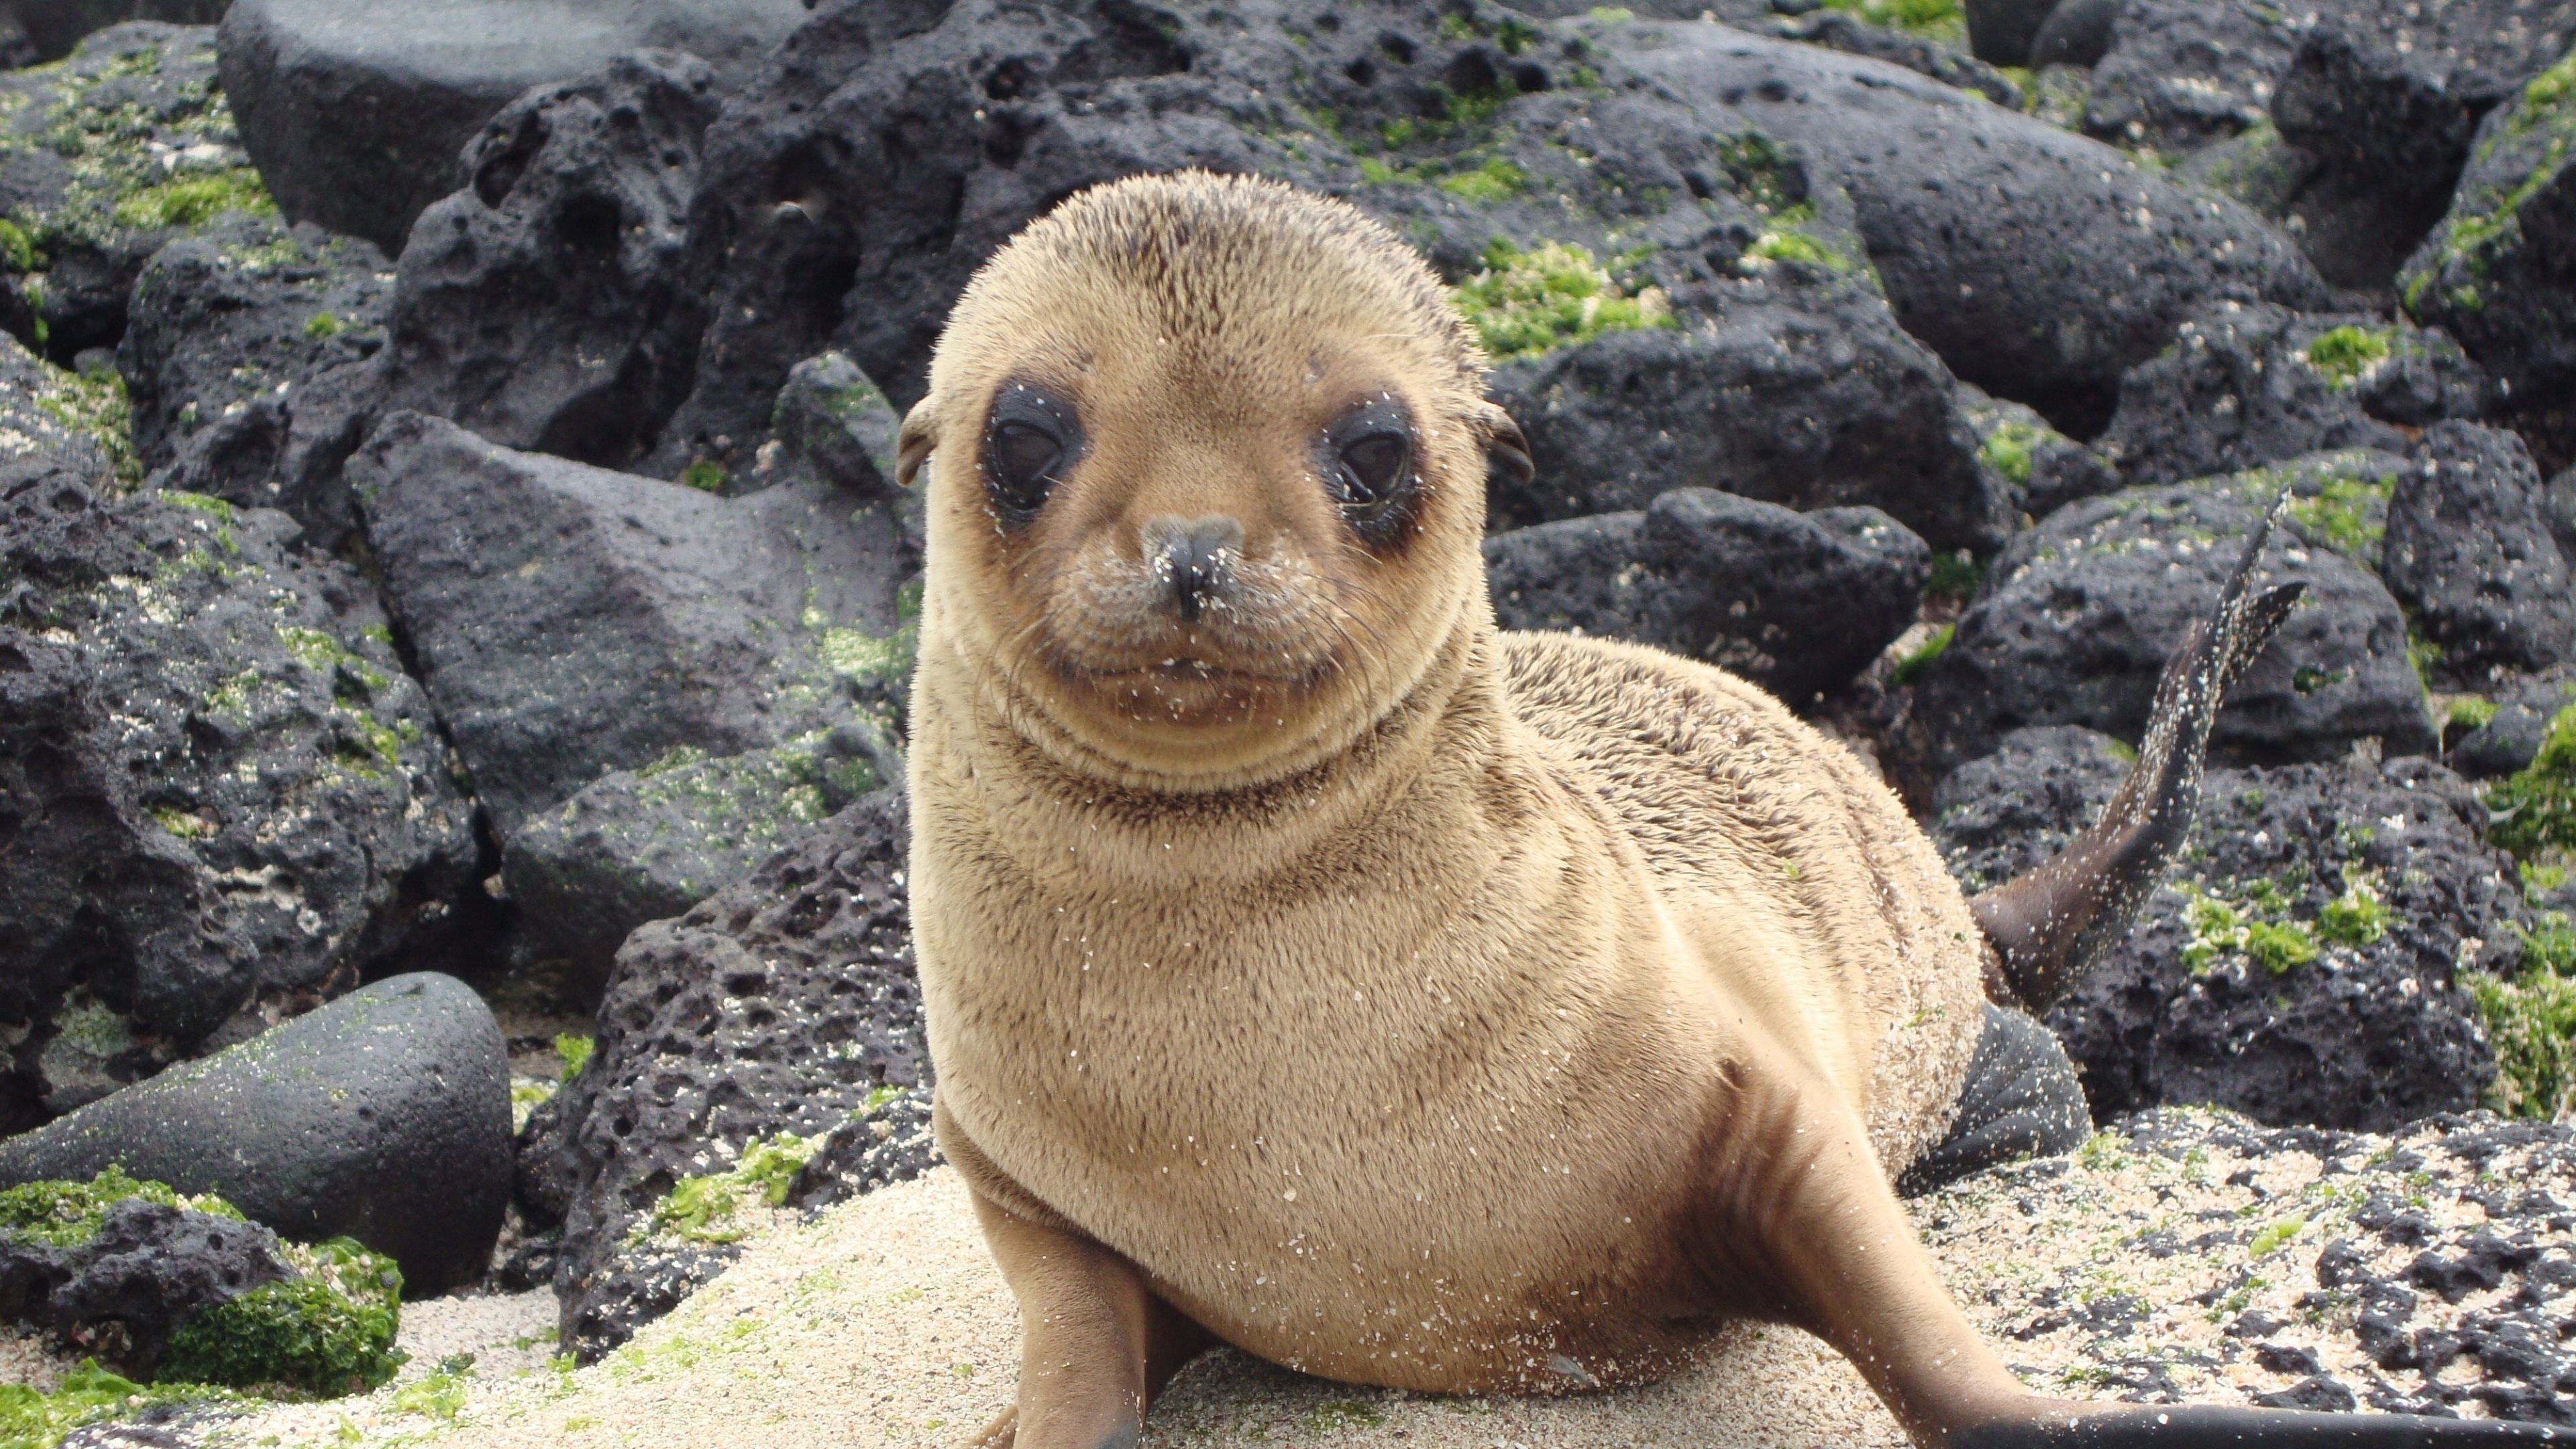 Sea lion eared seal, Cute animals wallpapers, Galapagos Islands beauty, High-resolution pictures, 3840x2160 4K Desktop